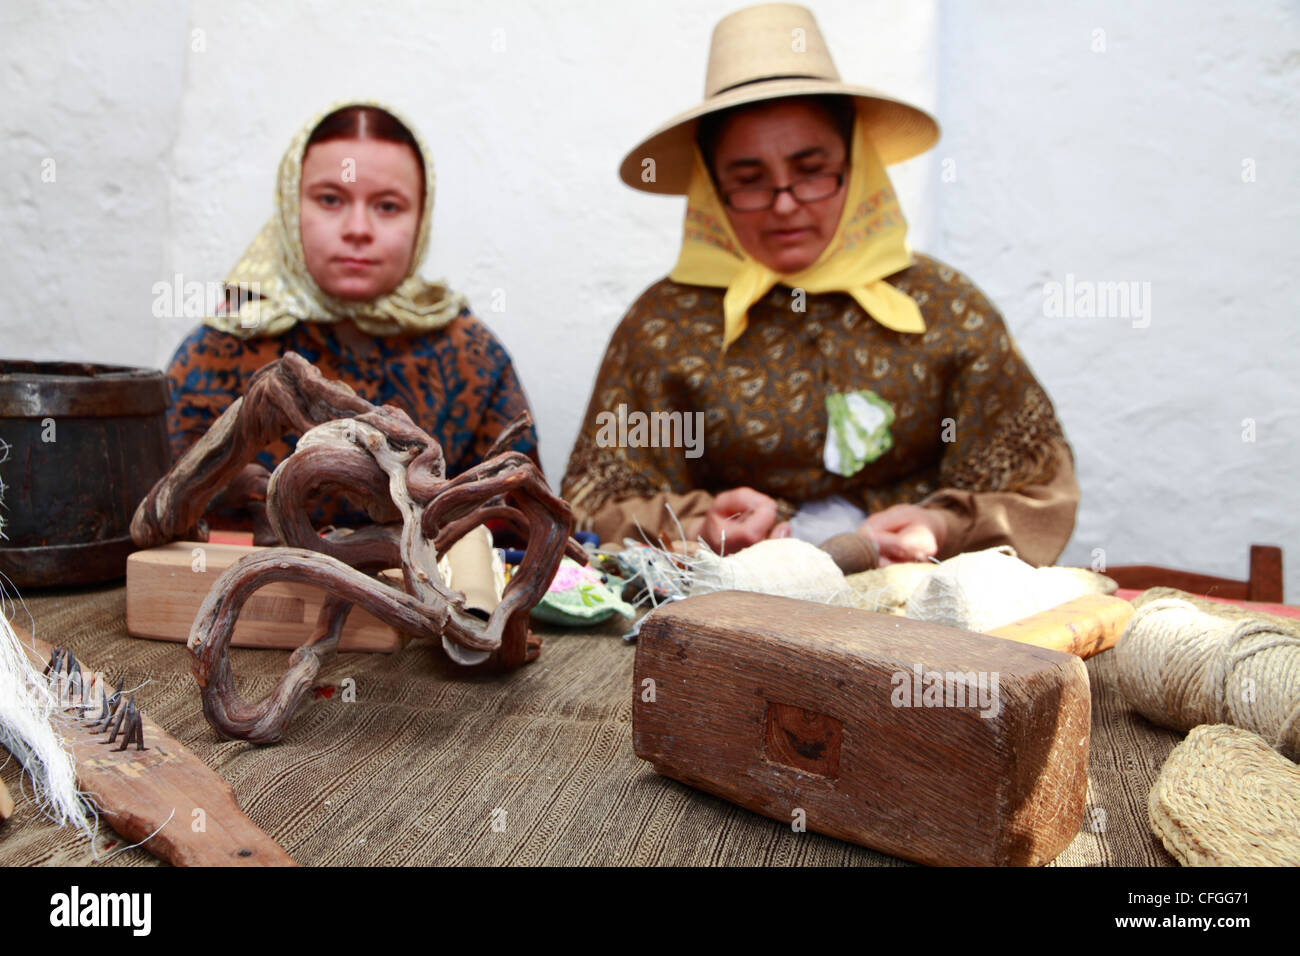 Women in traditional costume making 'Espardenyes', the traditional sandals at a handicraft fair, Ibiza, Spain Stock Photo